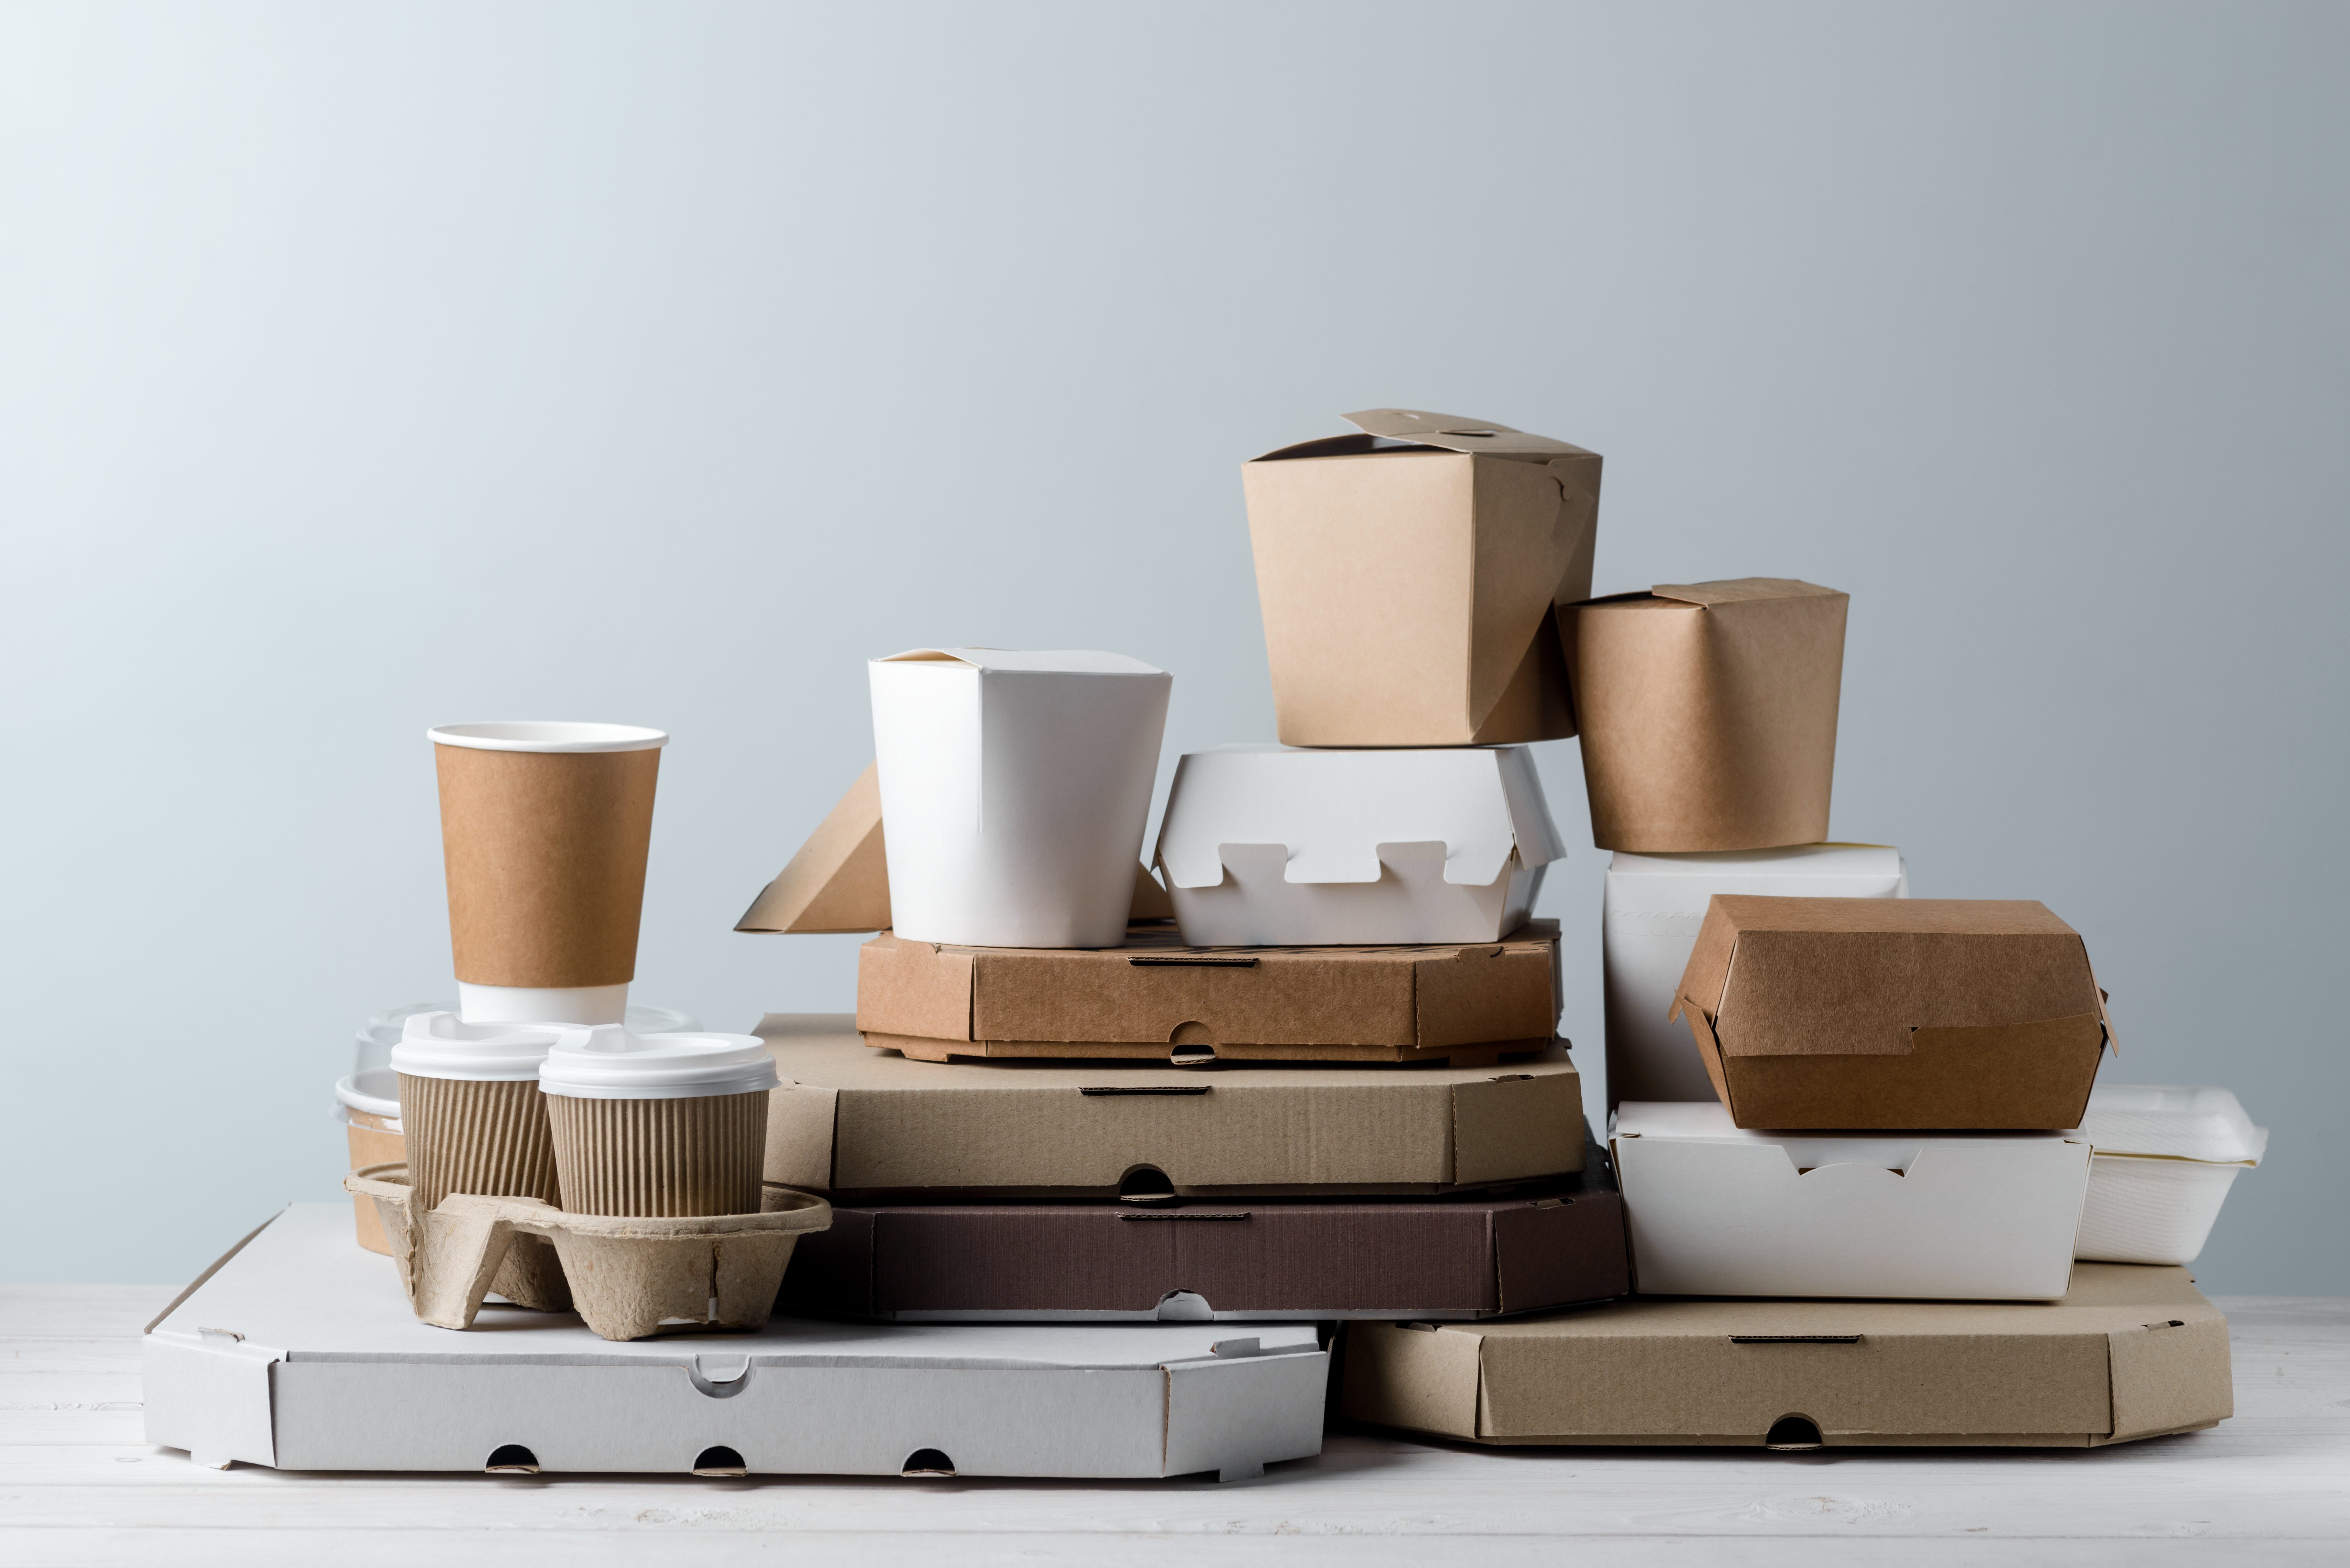 Assortment of pizza boxes, paper food containers, take-out coffee cups in holder, close-up. Light grey background, wooden surface. Food delivery.